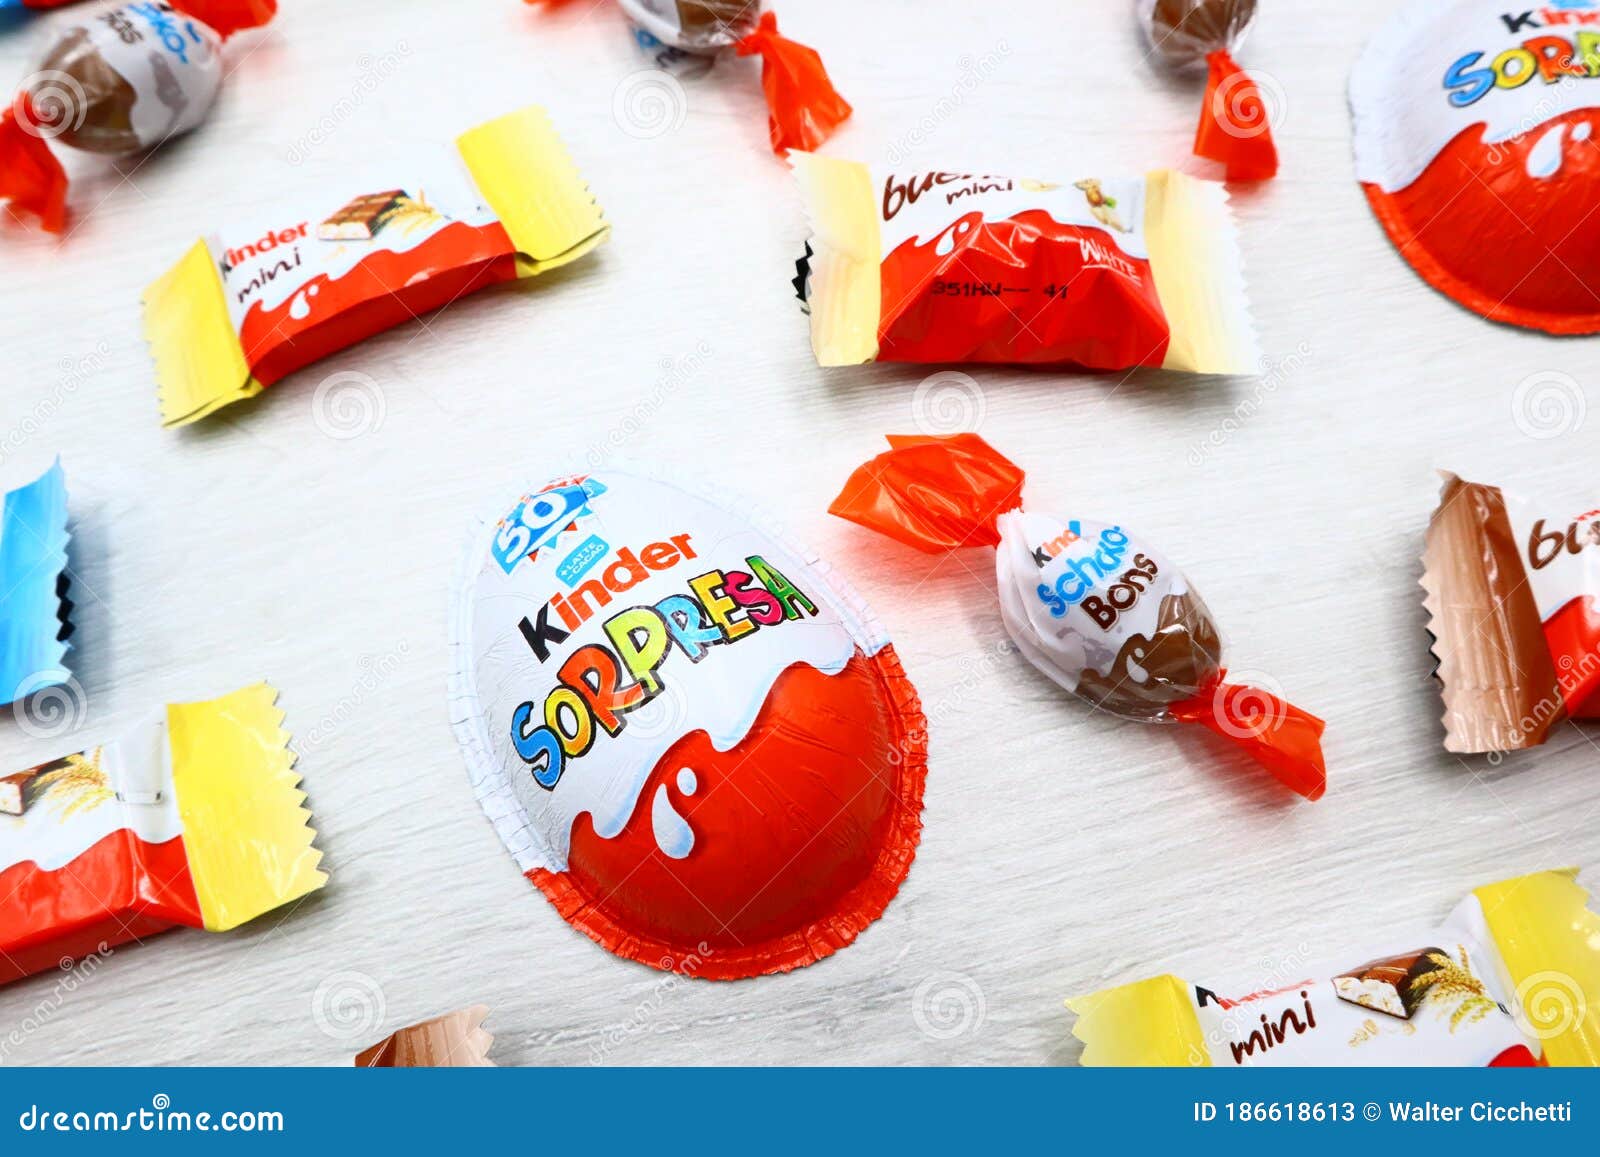 Kinder Surprise and Kinder Mini Chocolates Made in Italy by Ferrero  Editorial Stock Photo - Image of candy, confection: 186618613